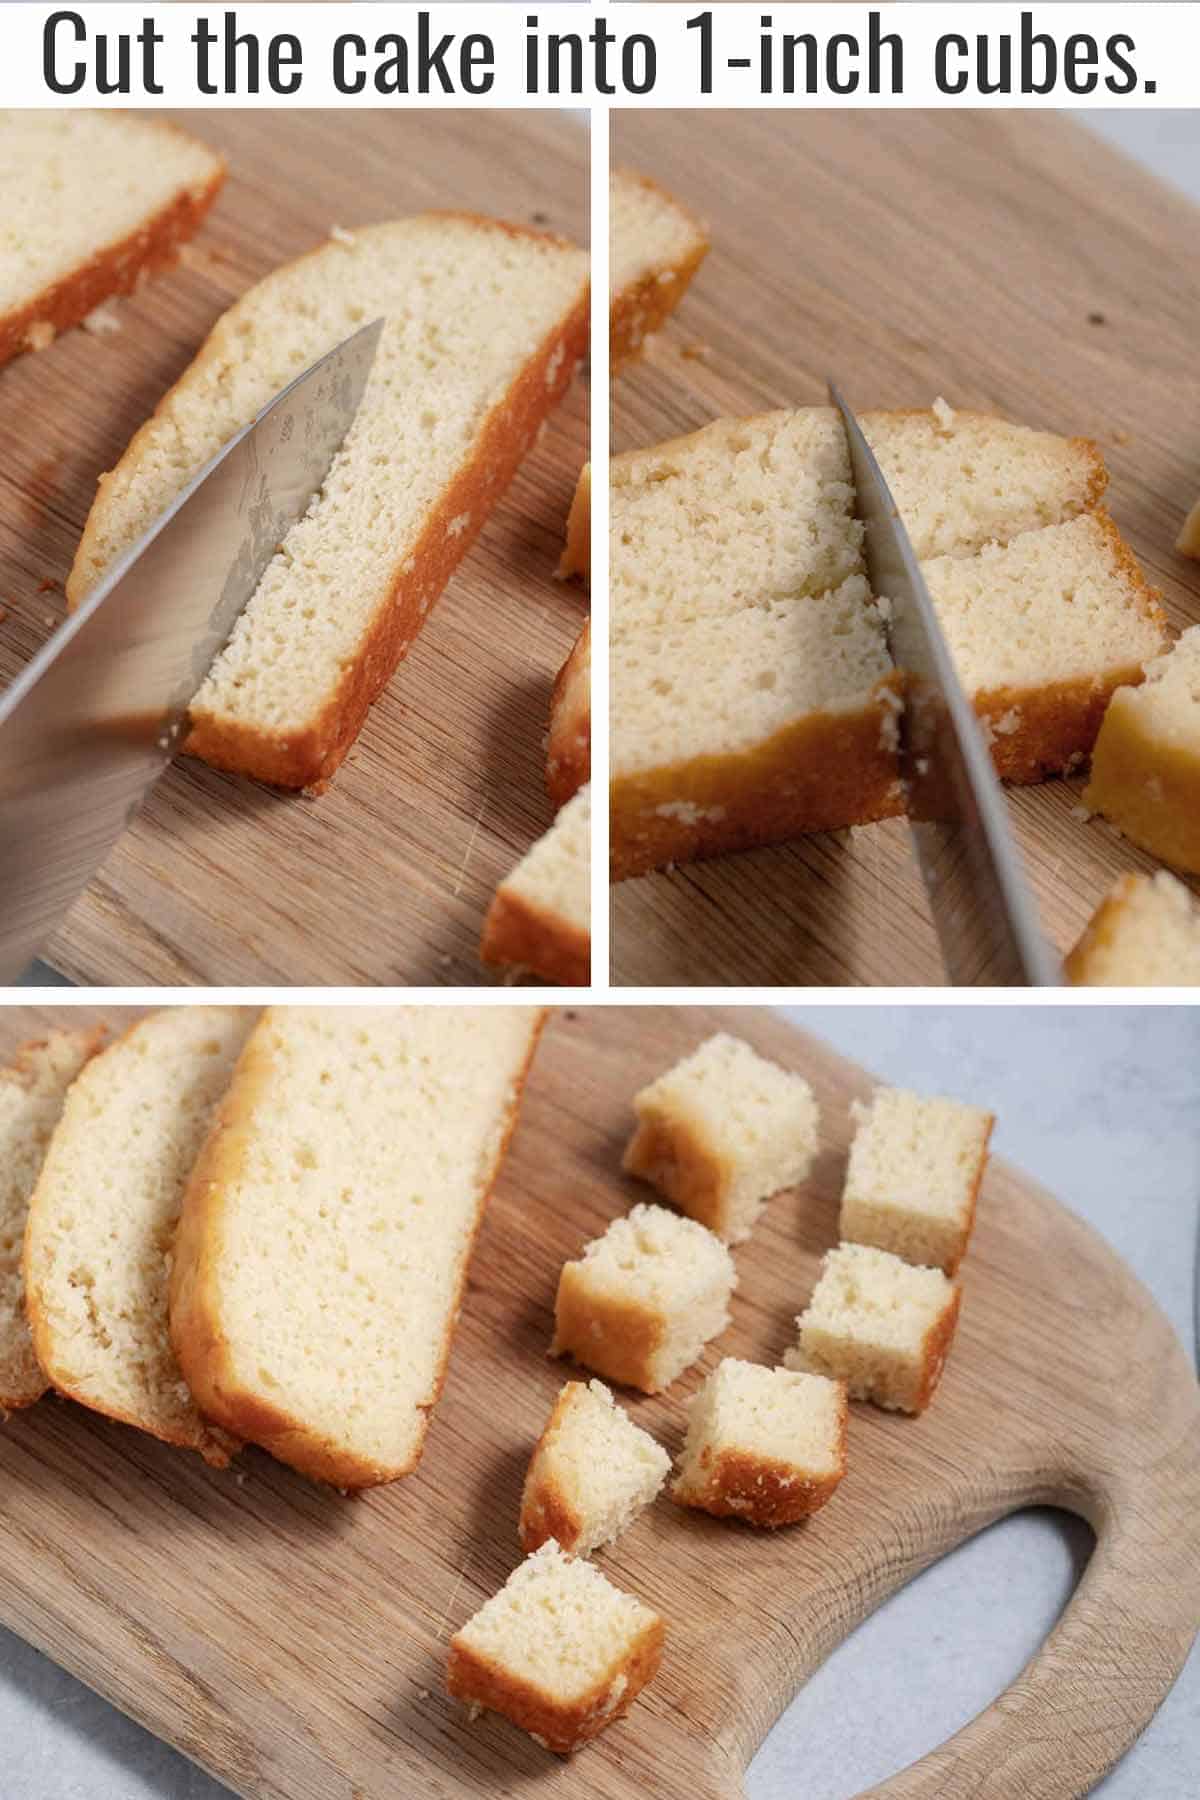 Process of cutting angel food cake into cubes from a loaf. Cut the cake into slices. Cut each slice in half. Then cut cubes.